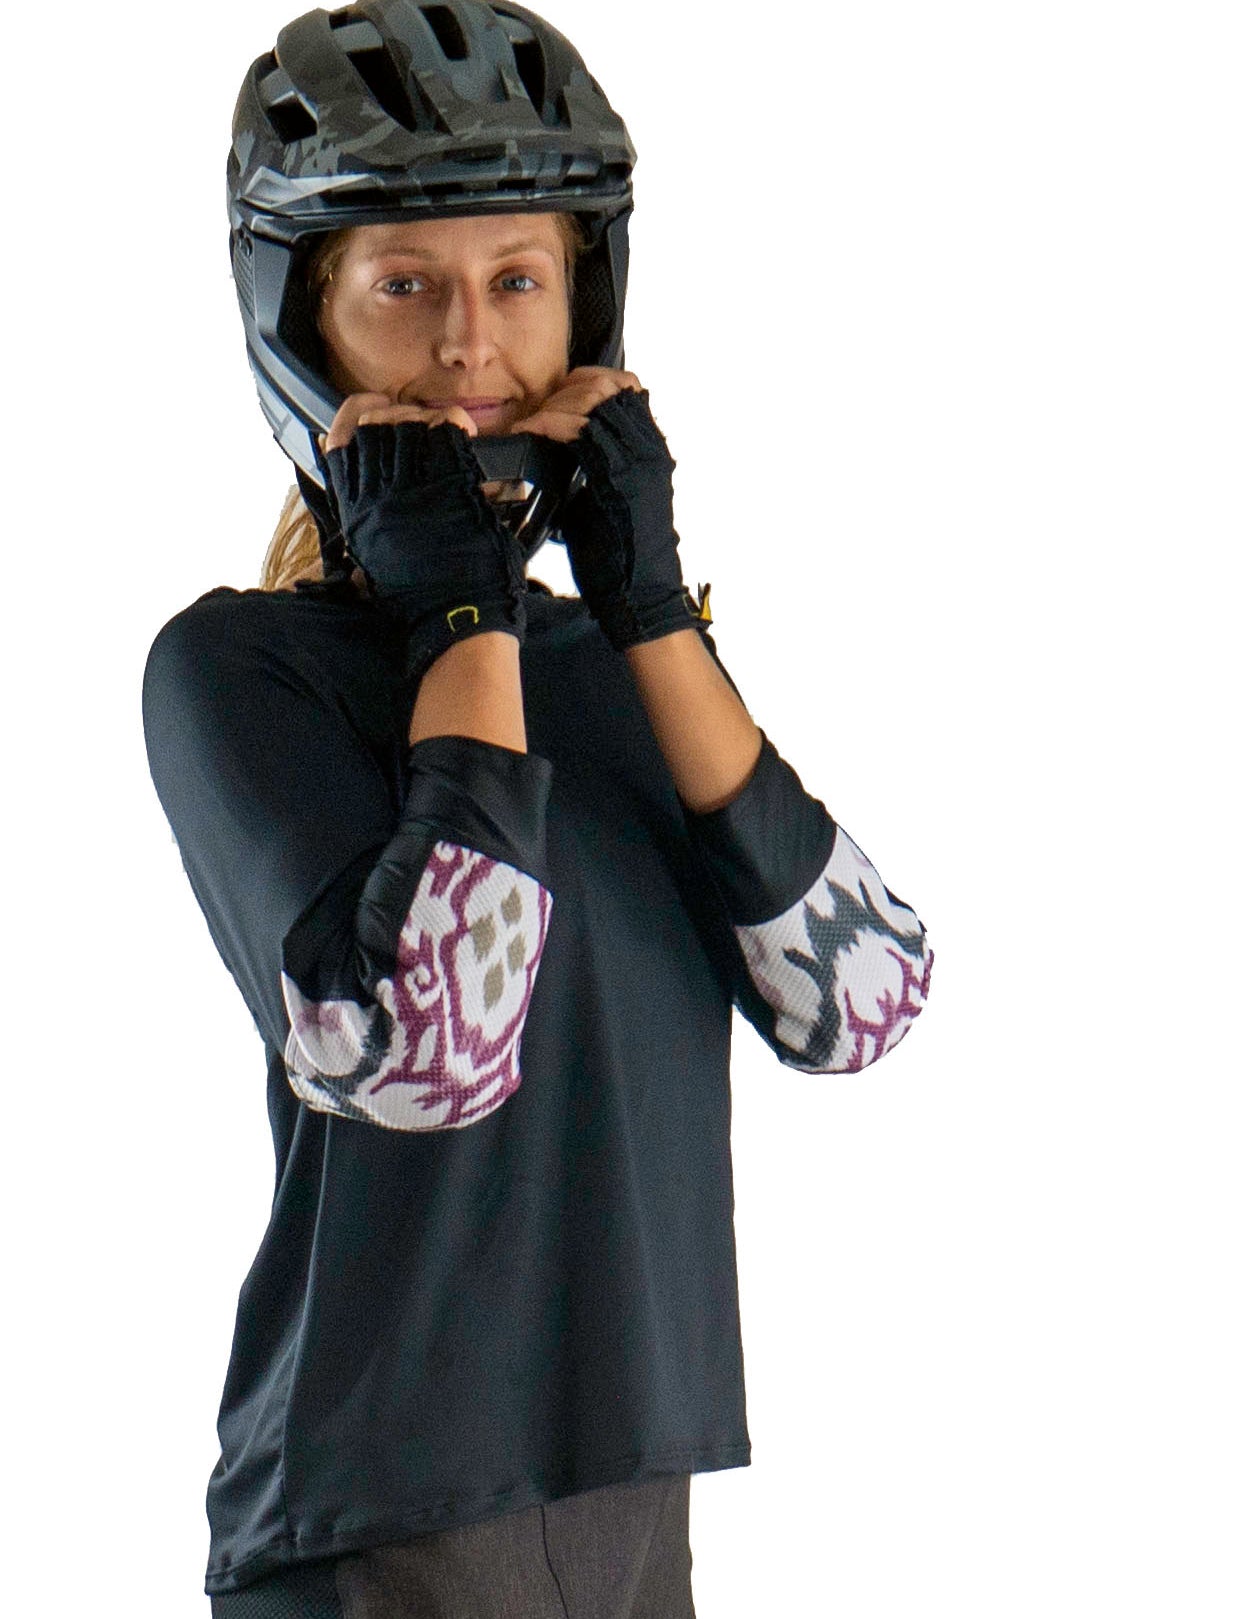 MTB JERSEY BLACK WITH FUNKY ELBOW PANELS no G-Form Pads - Moxie Cycling